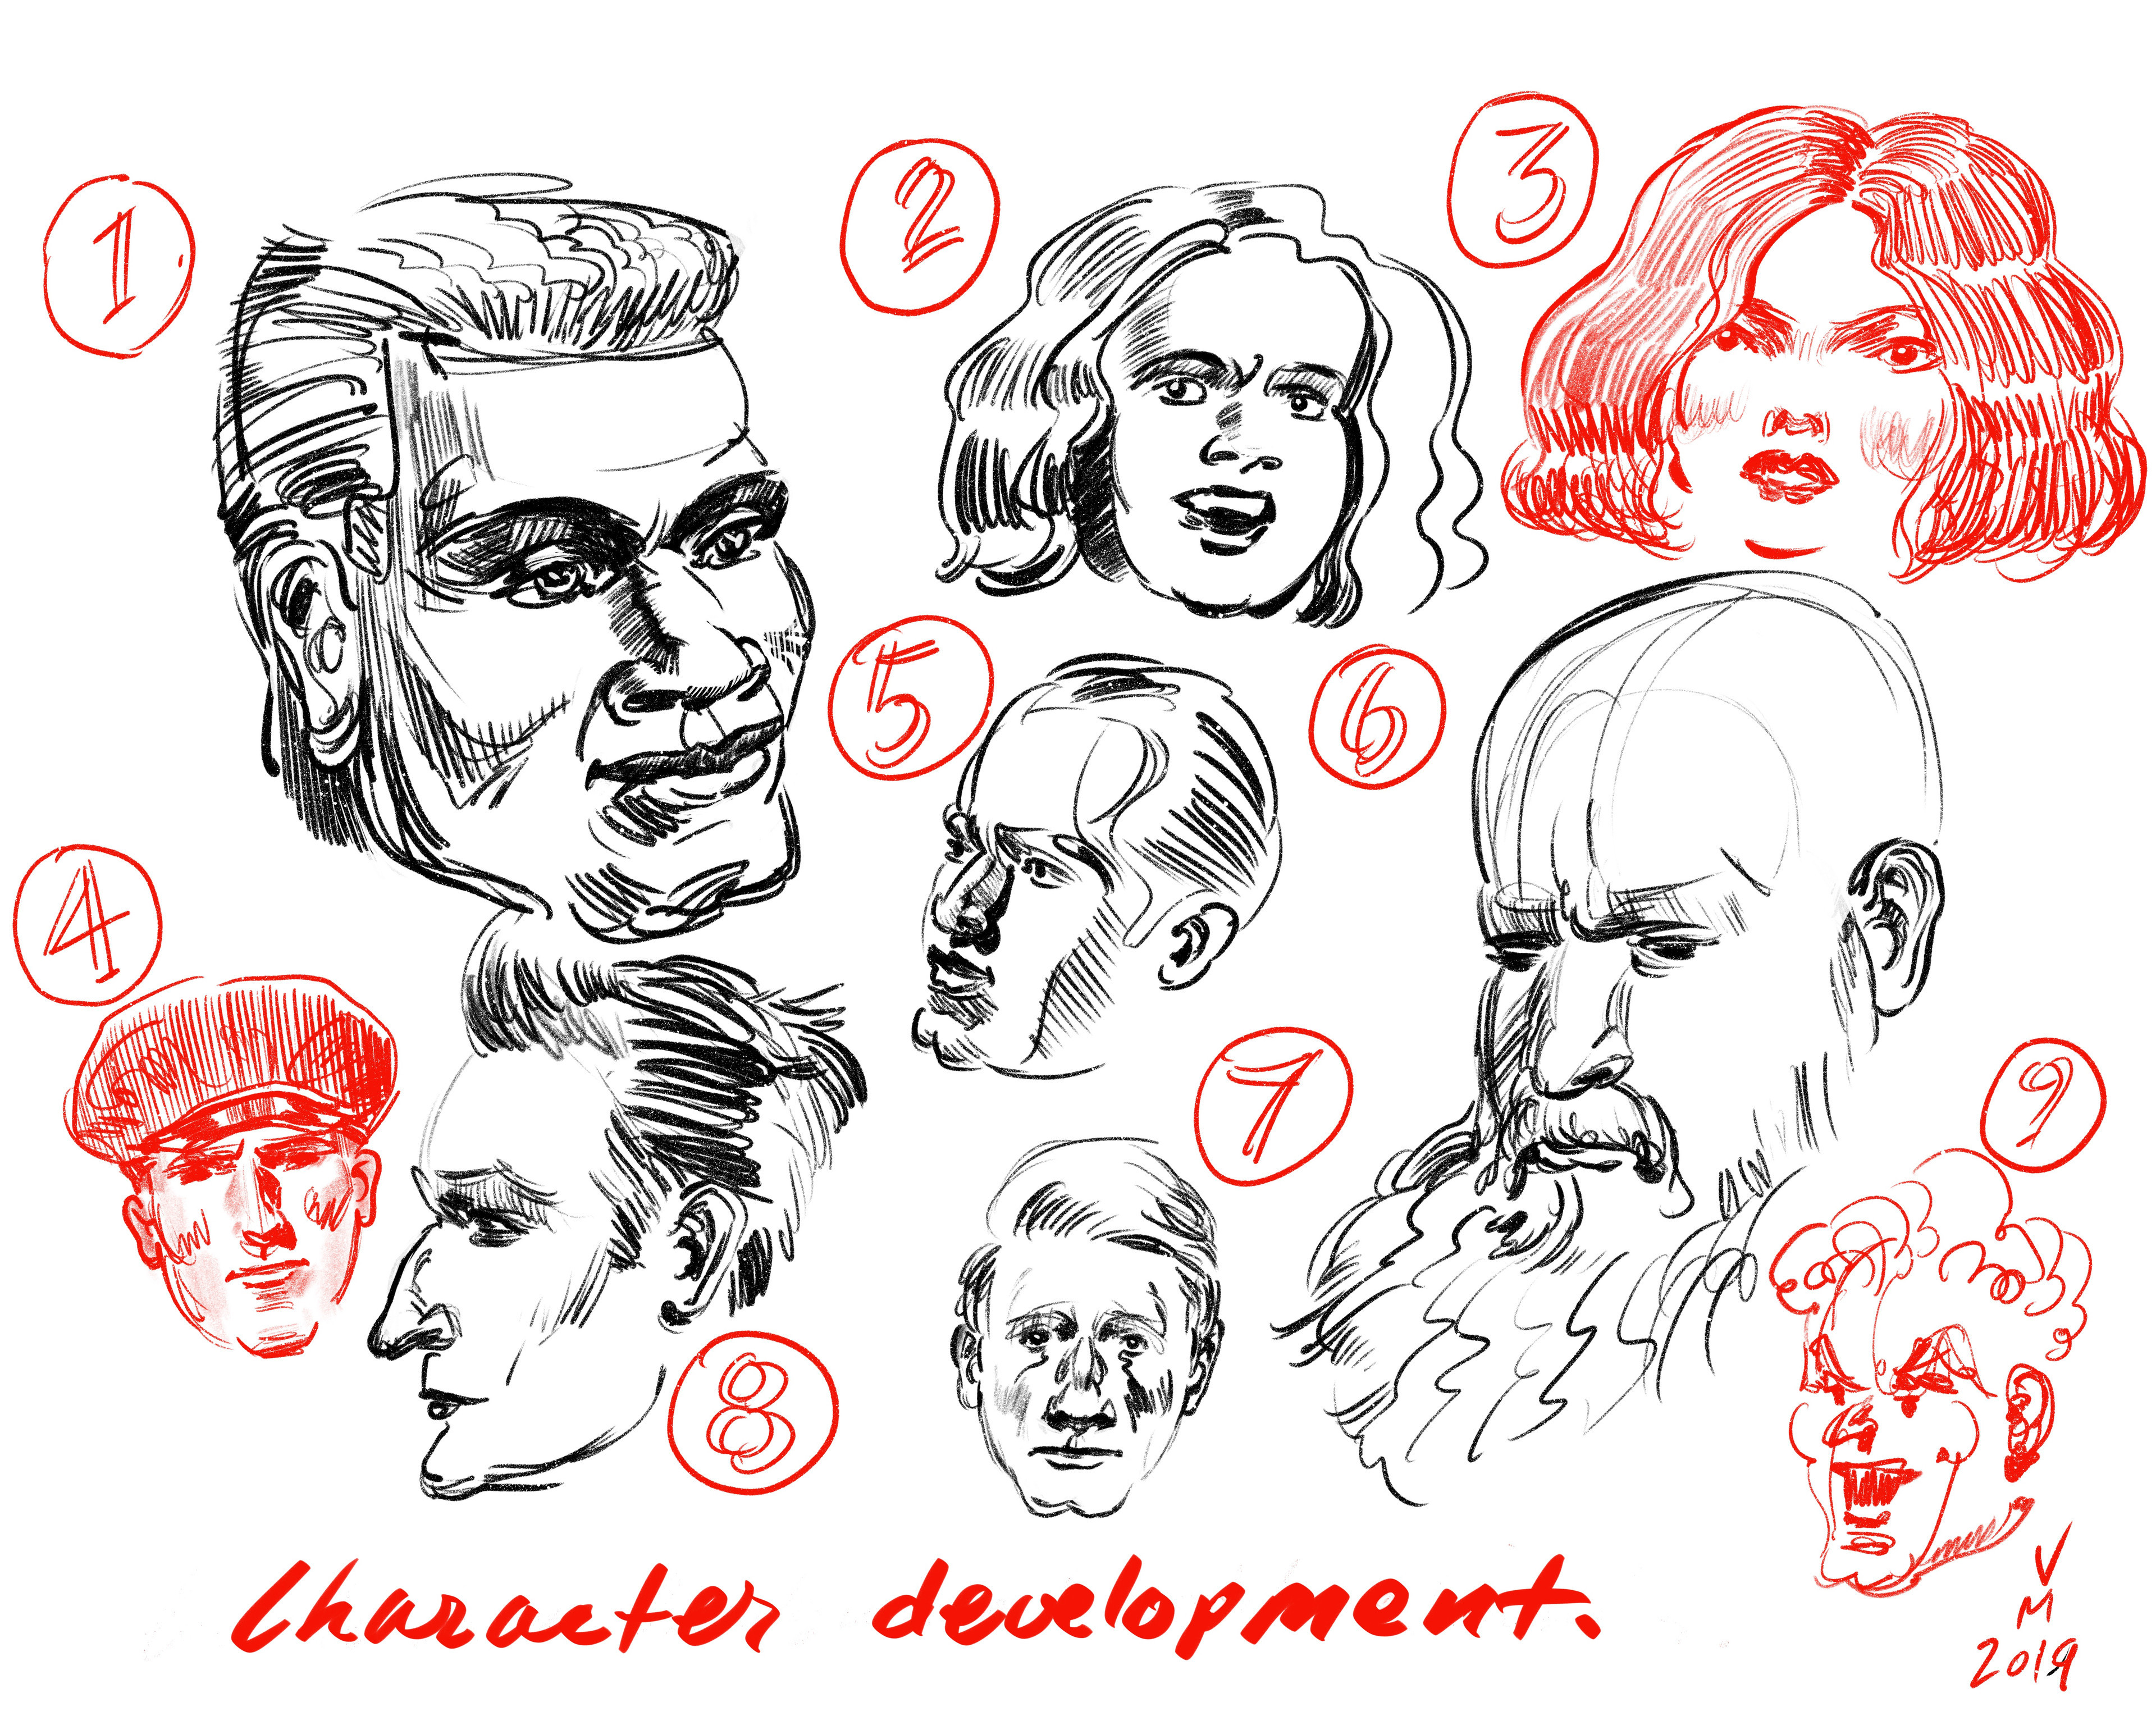 Practice from memory. Invent character types. Concentrate and the characters will appear in your mind.